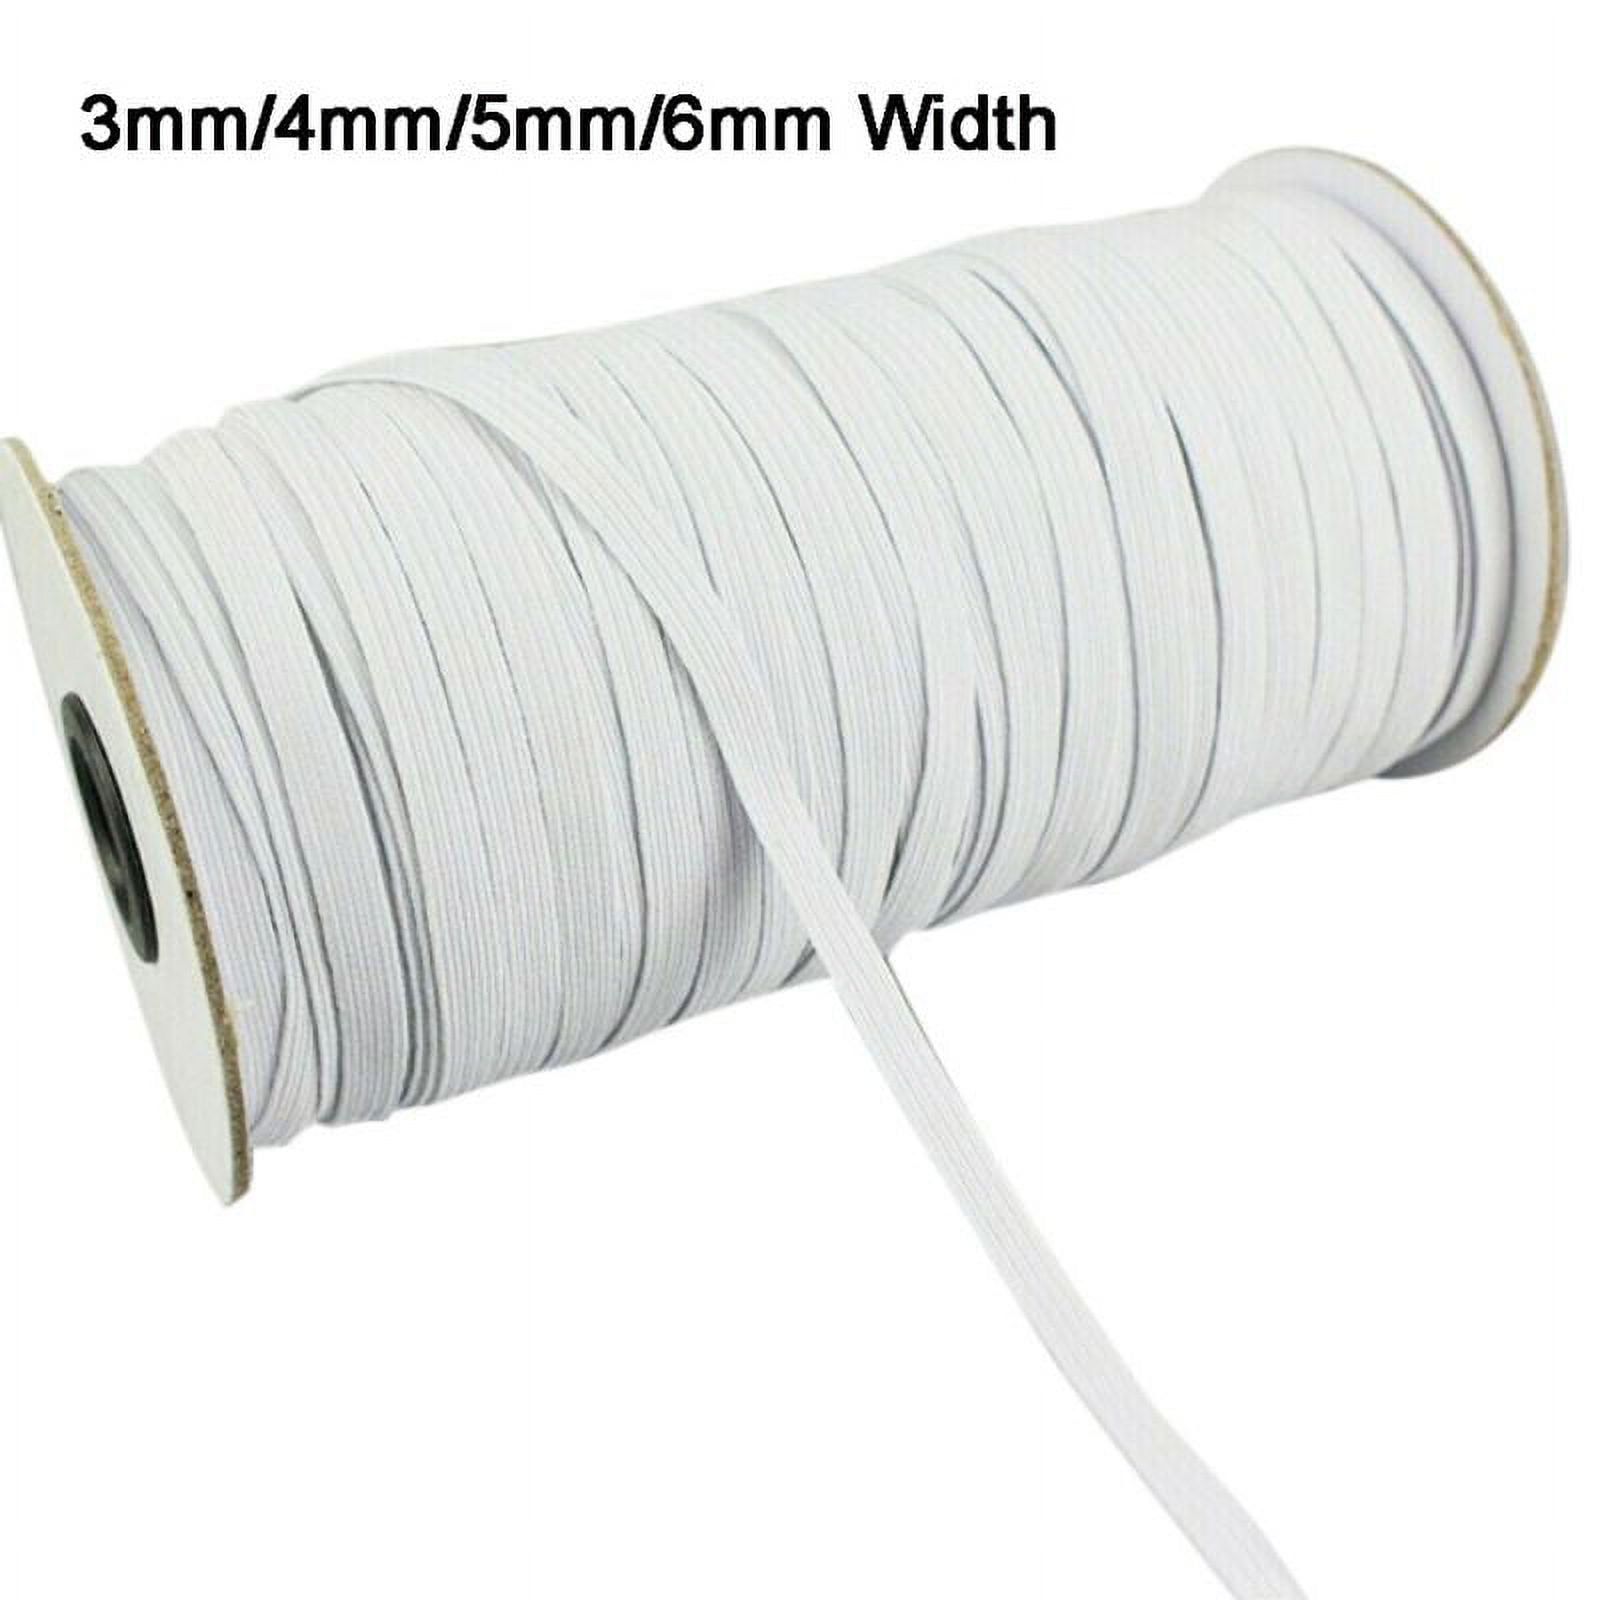 100 Yards White Yards Elastic Band 1/4 inch Elastic Cord Rope Sewing Crafts  DIY Mask Bedspread Cuff for Craft Mask Making - AliExpress